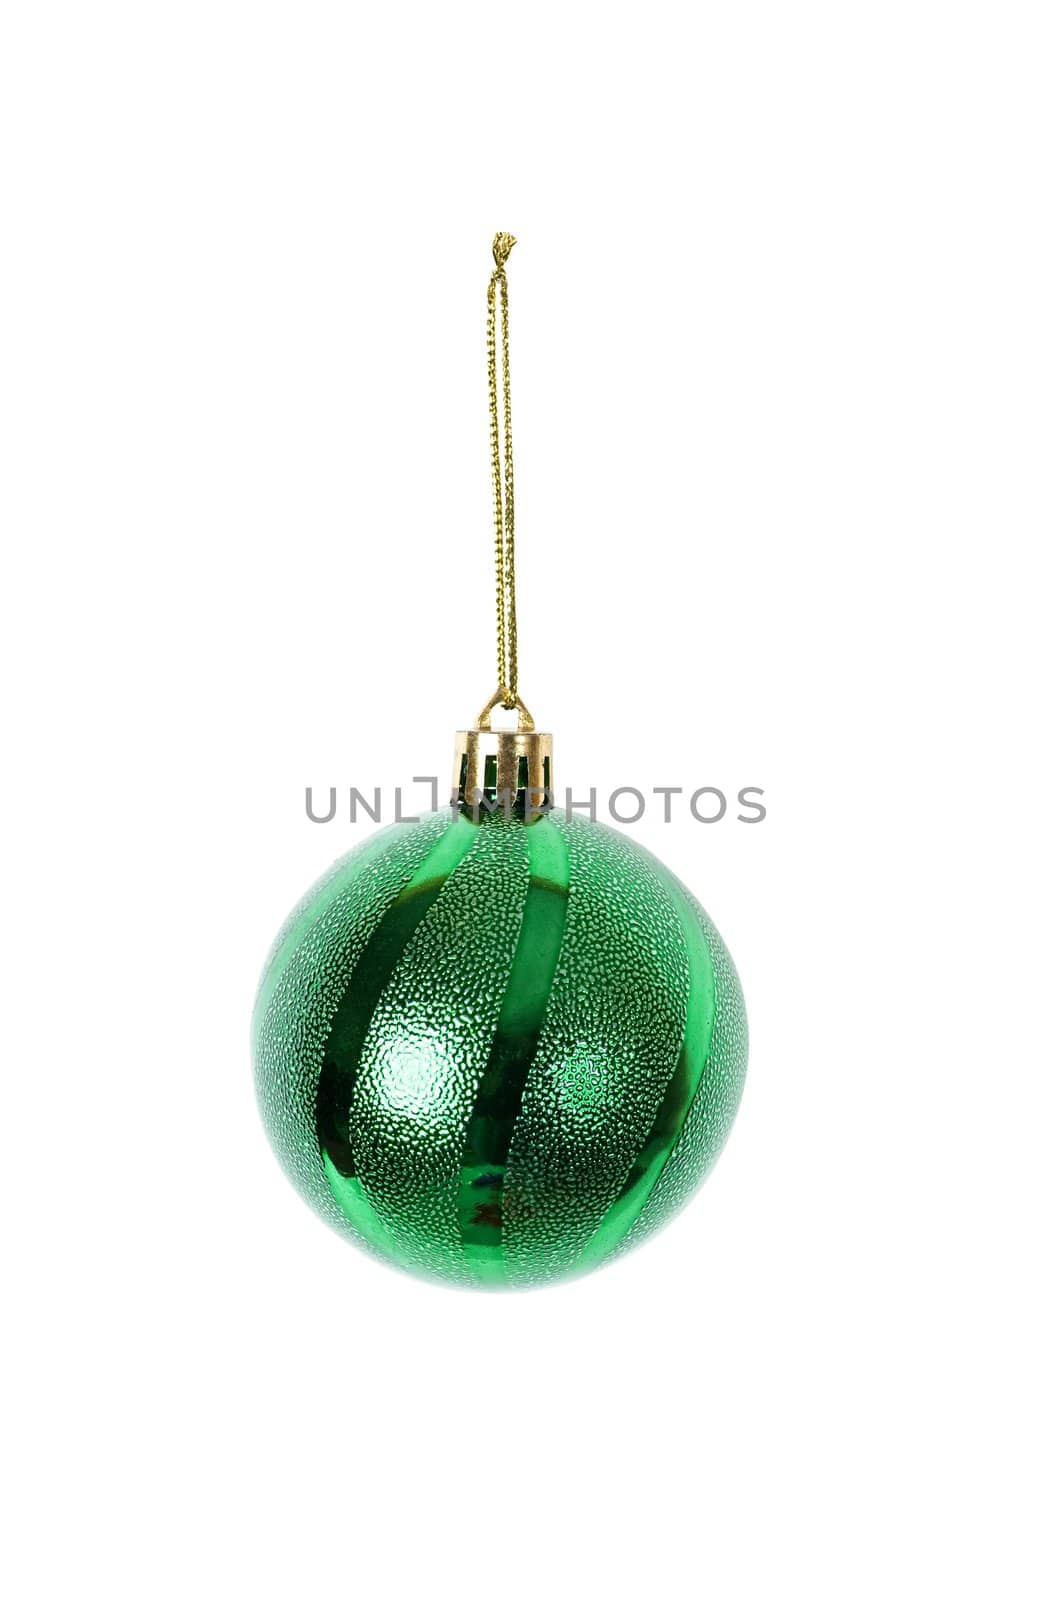 green christmas decoration isolated on white background